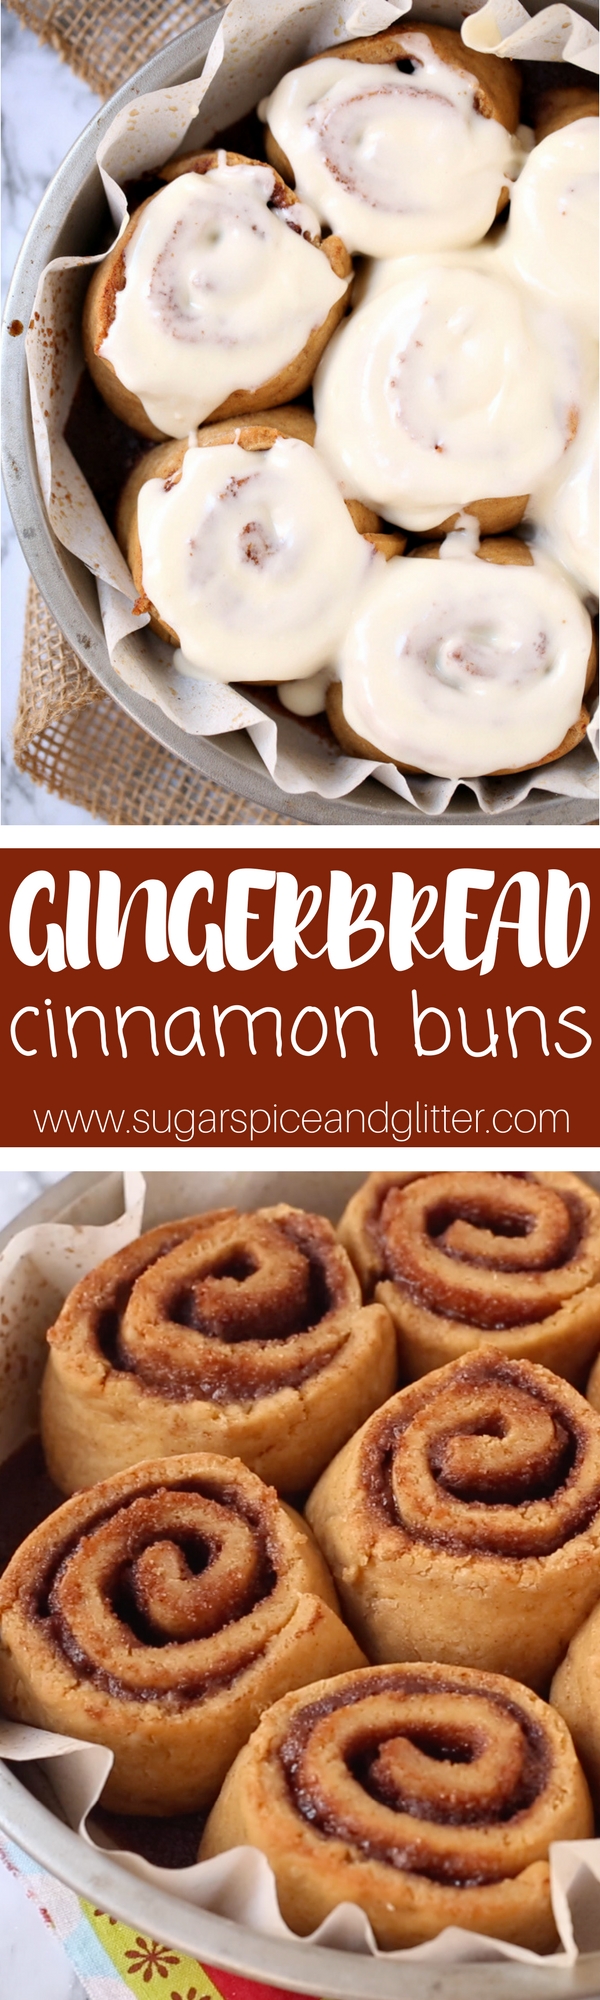 Gingerbread Cinnamon Buns (with Video)